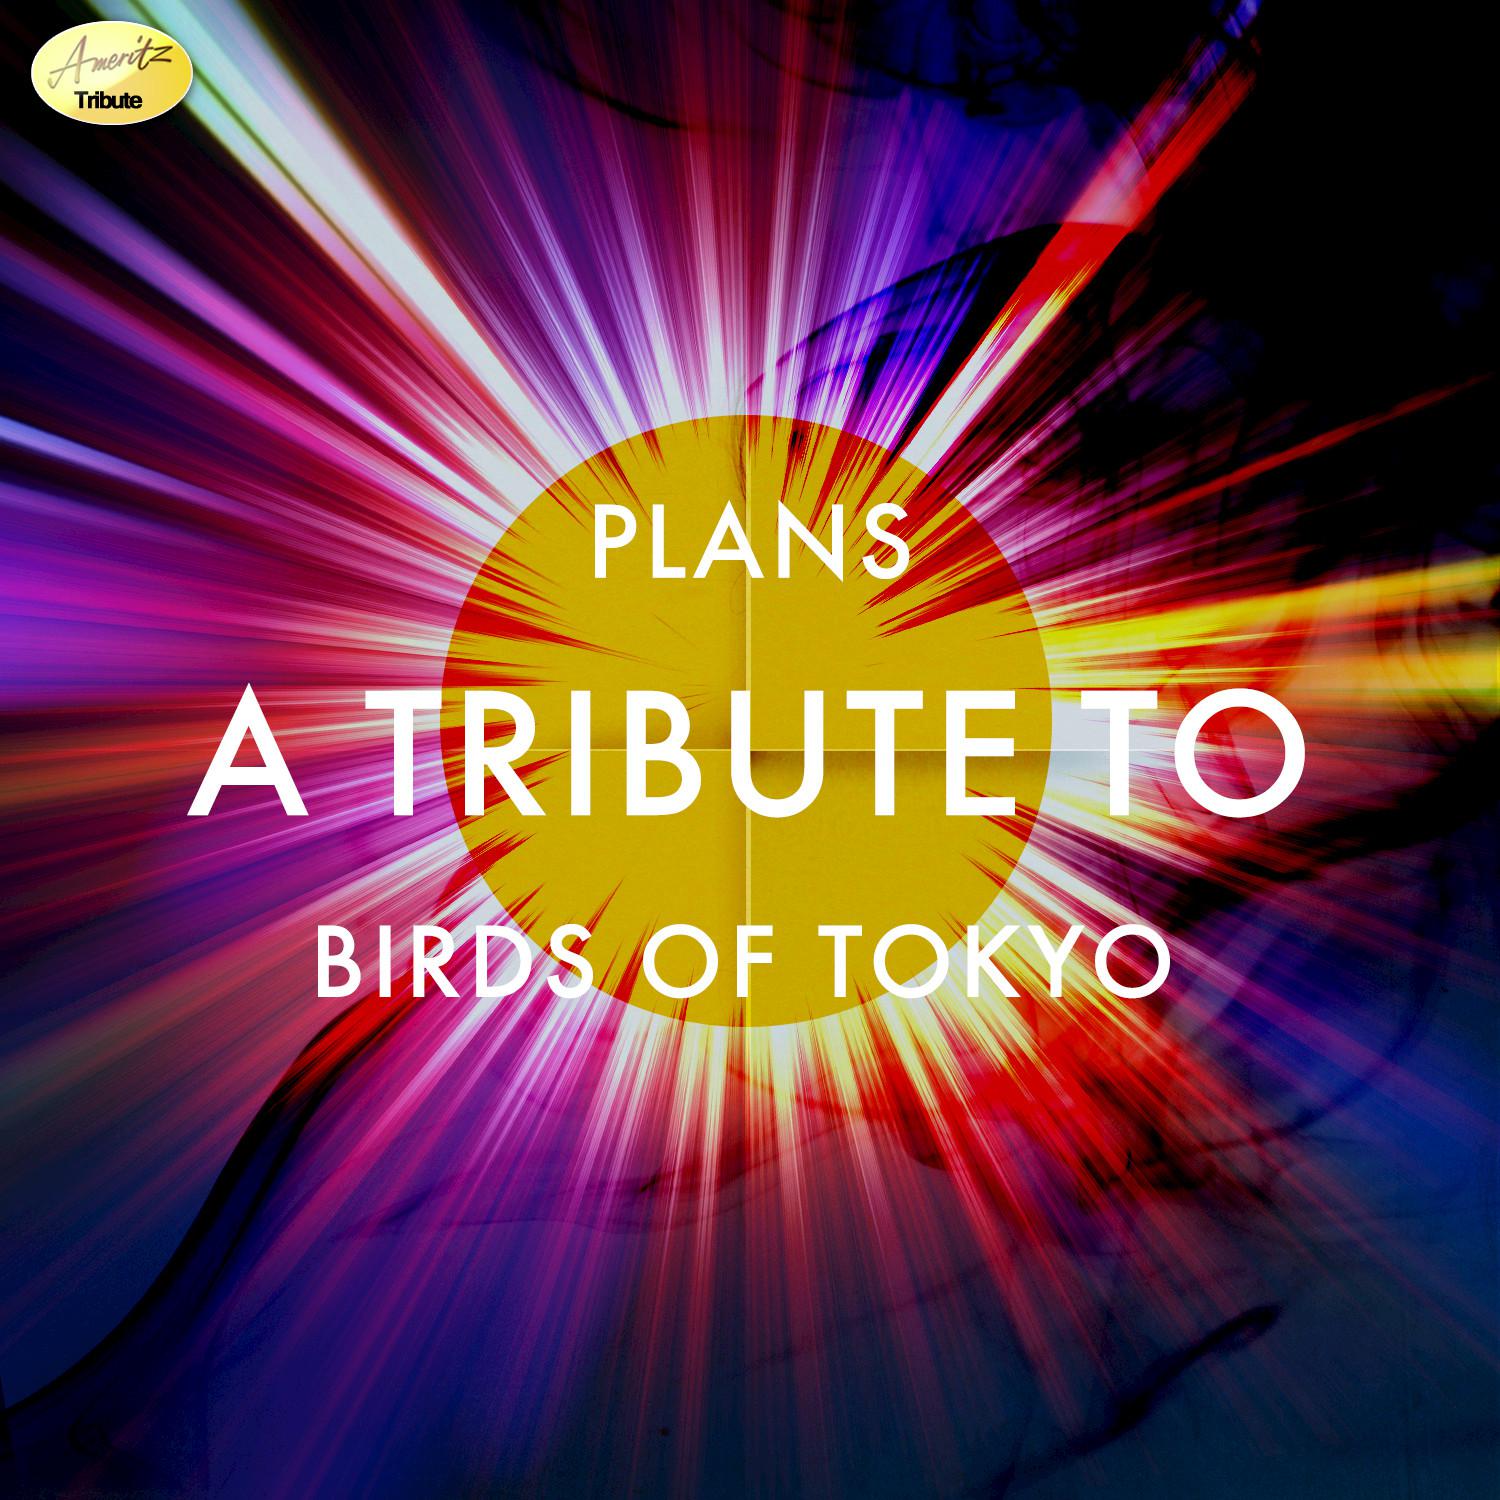 Plans - A Tribute to Birds of Tokyo